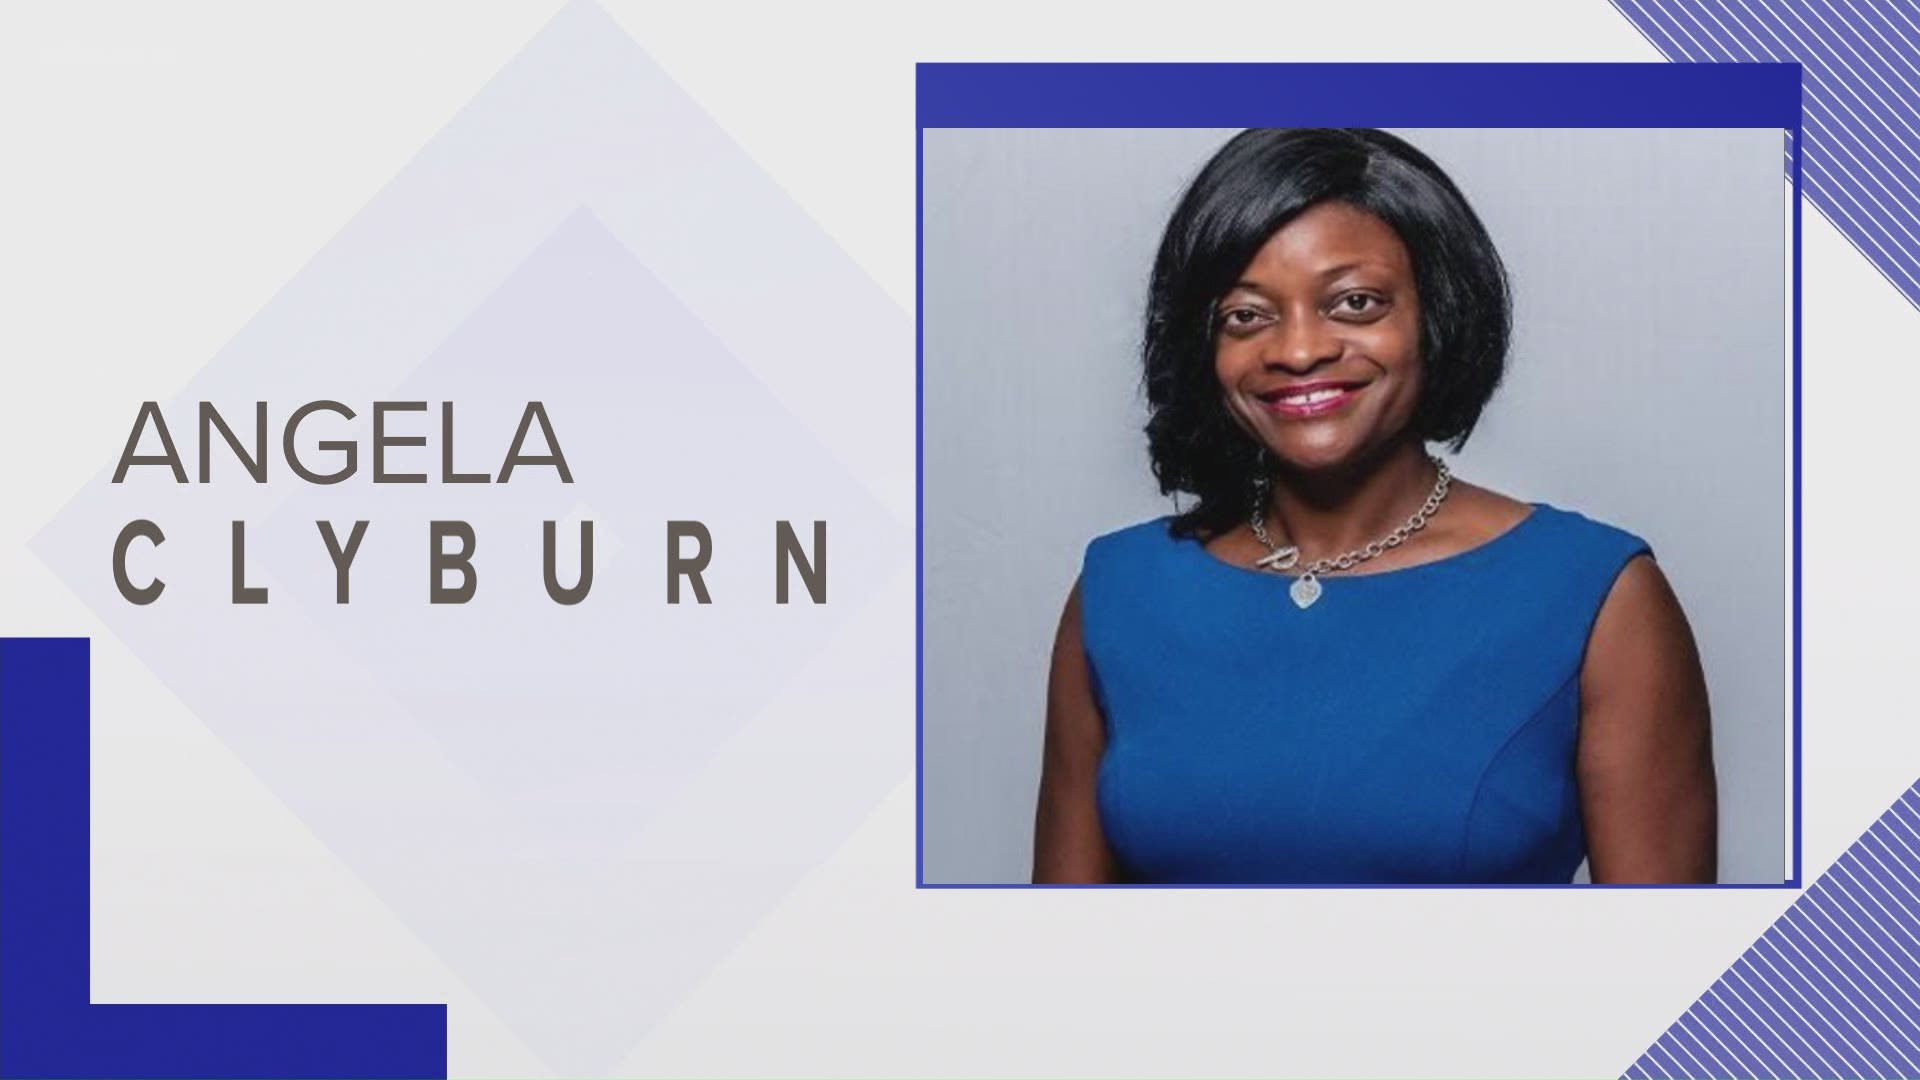 Clyburn is the youngest daughter of U.S. Congressman Jim Clyburn and works as political director of the S.C. Democratic Party.